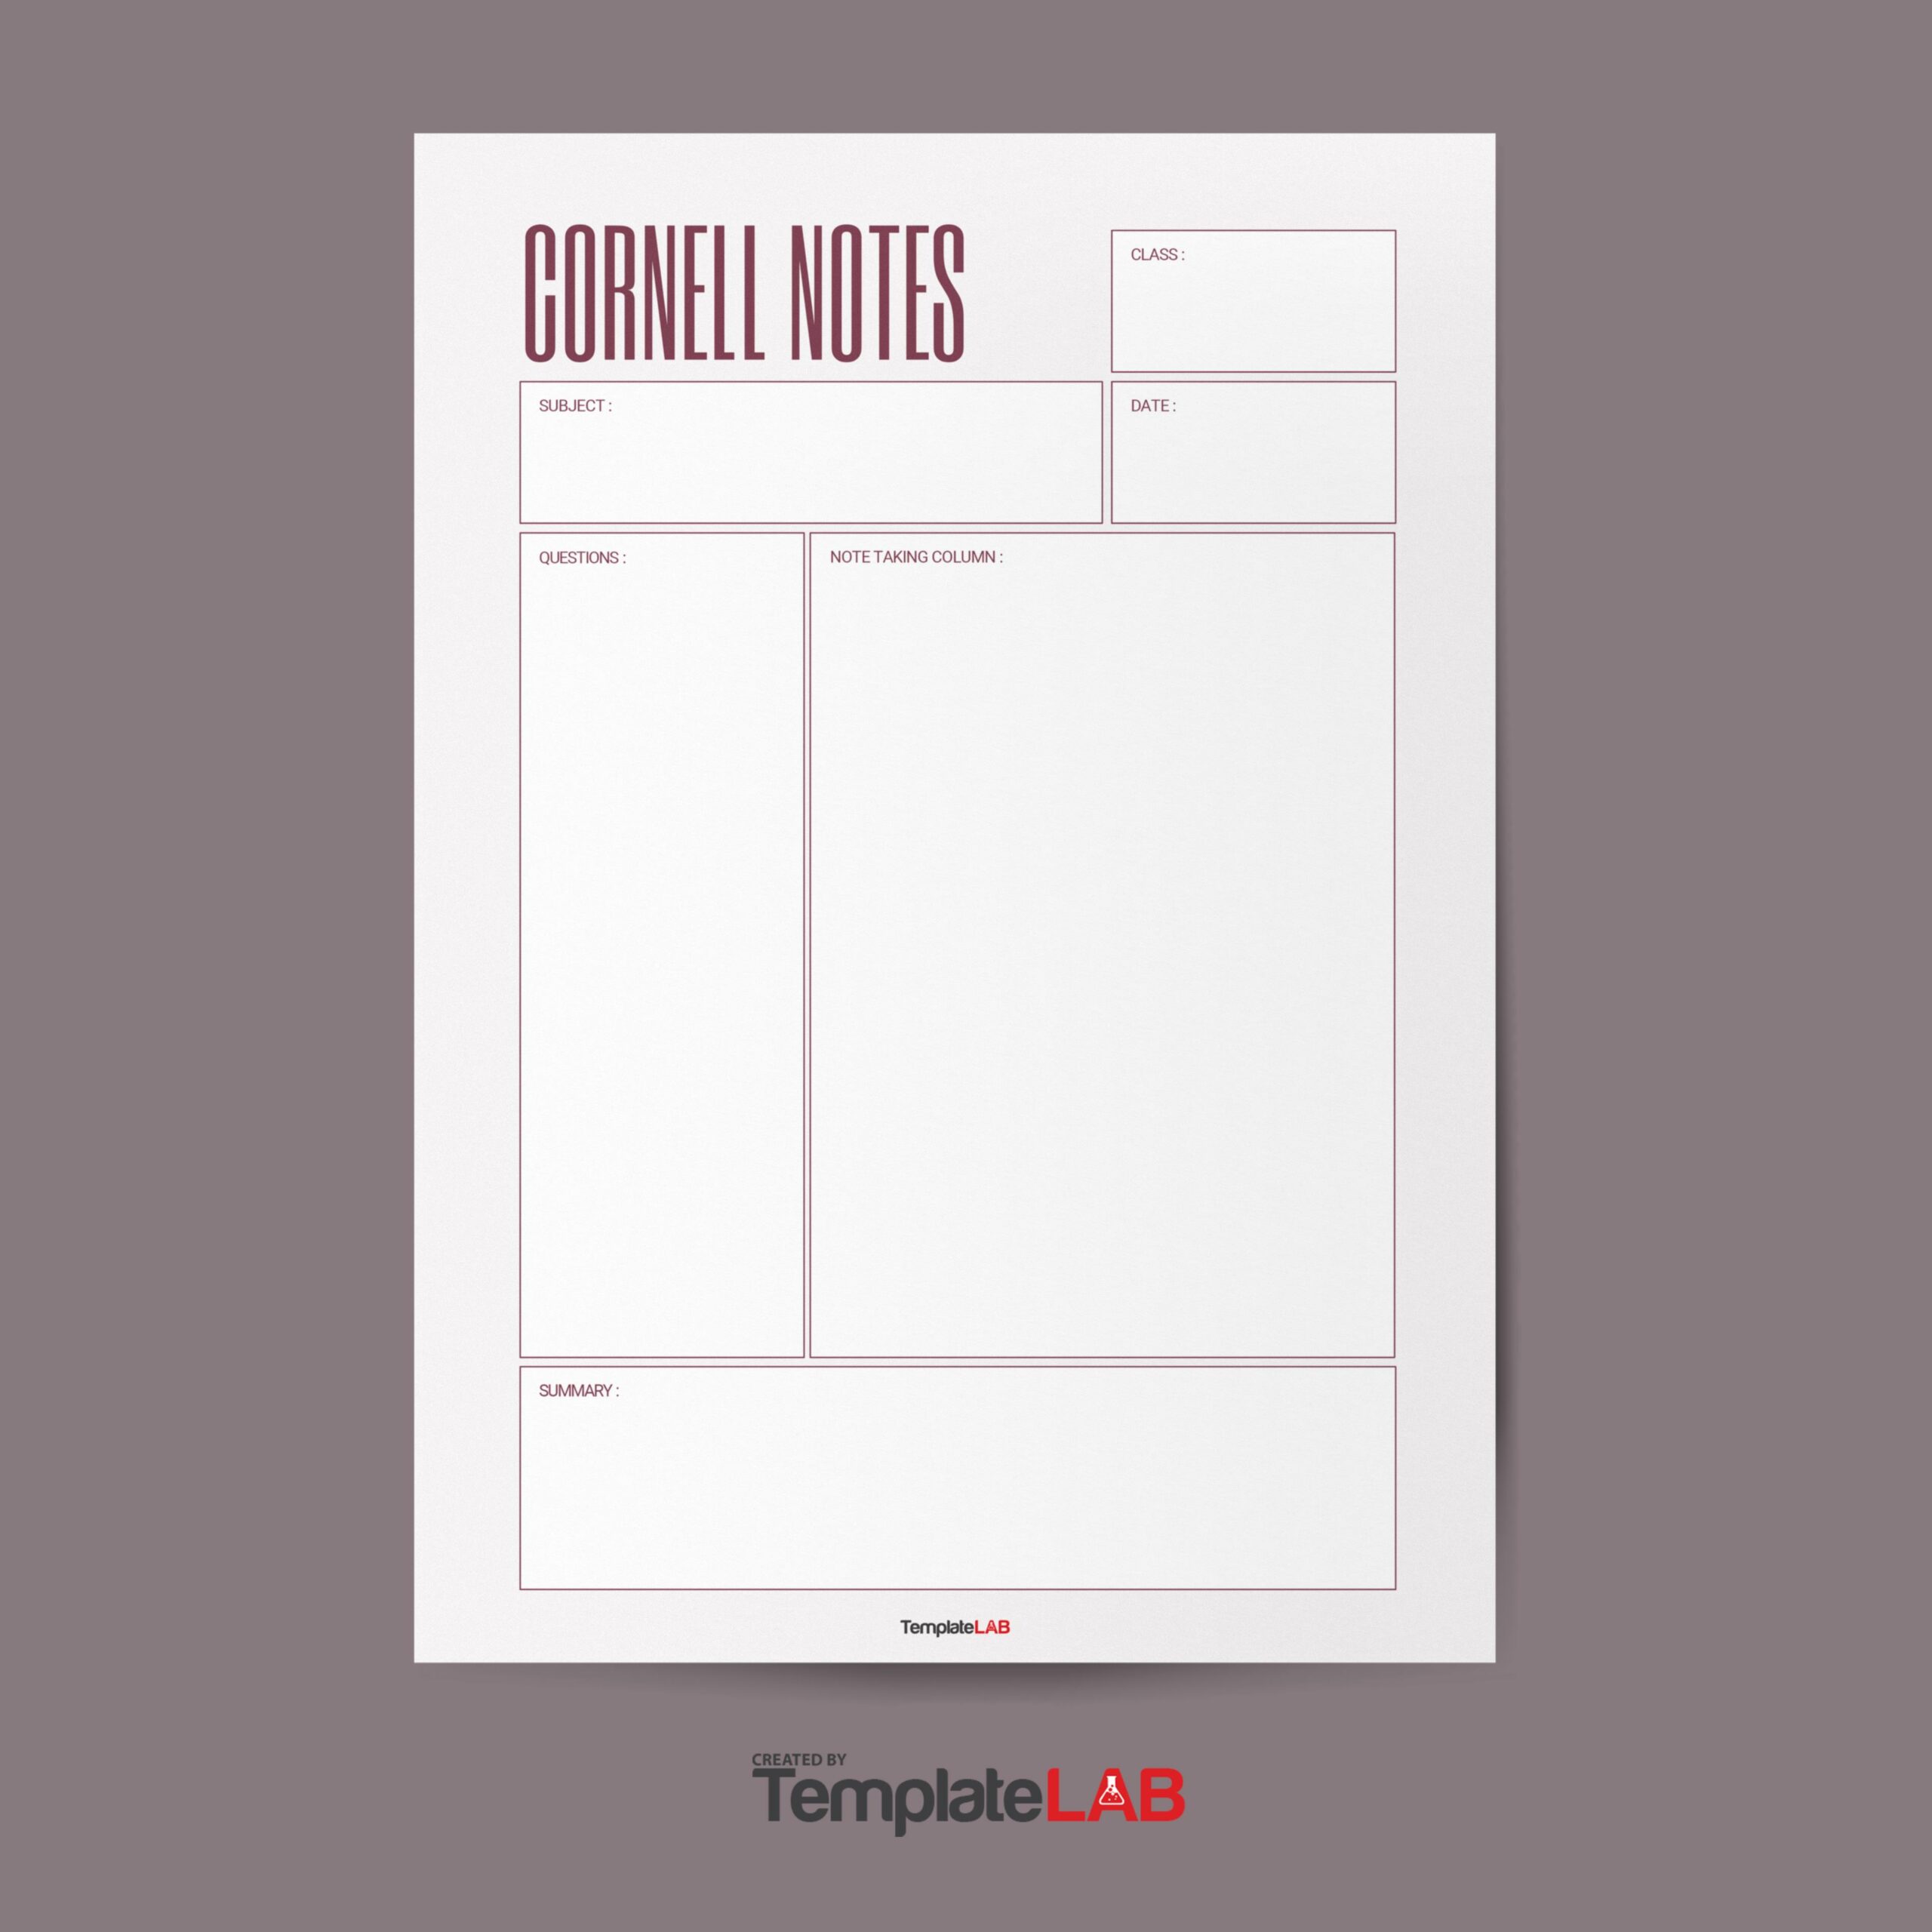 Free Cornell Notes Template V4